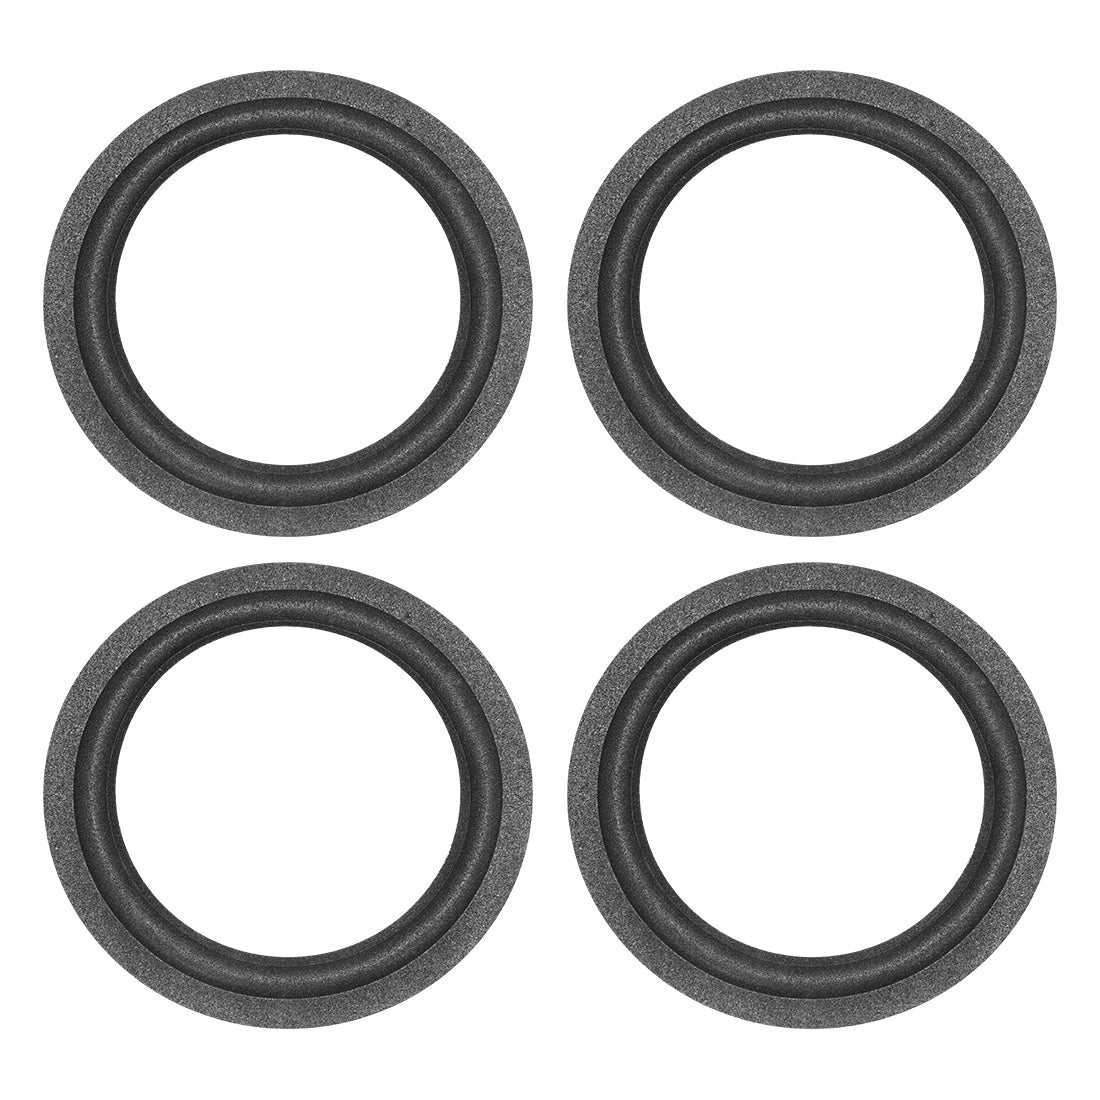 uxcell Uxcell 4.5" 4.5 inch Speaker Foam Edge Surround Rings Replacement Part for Speaker Repair or DIY 4pcs